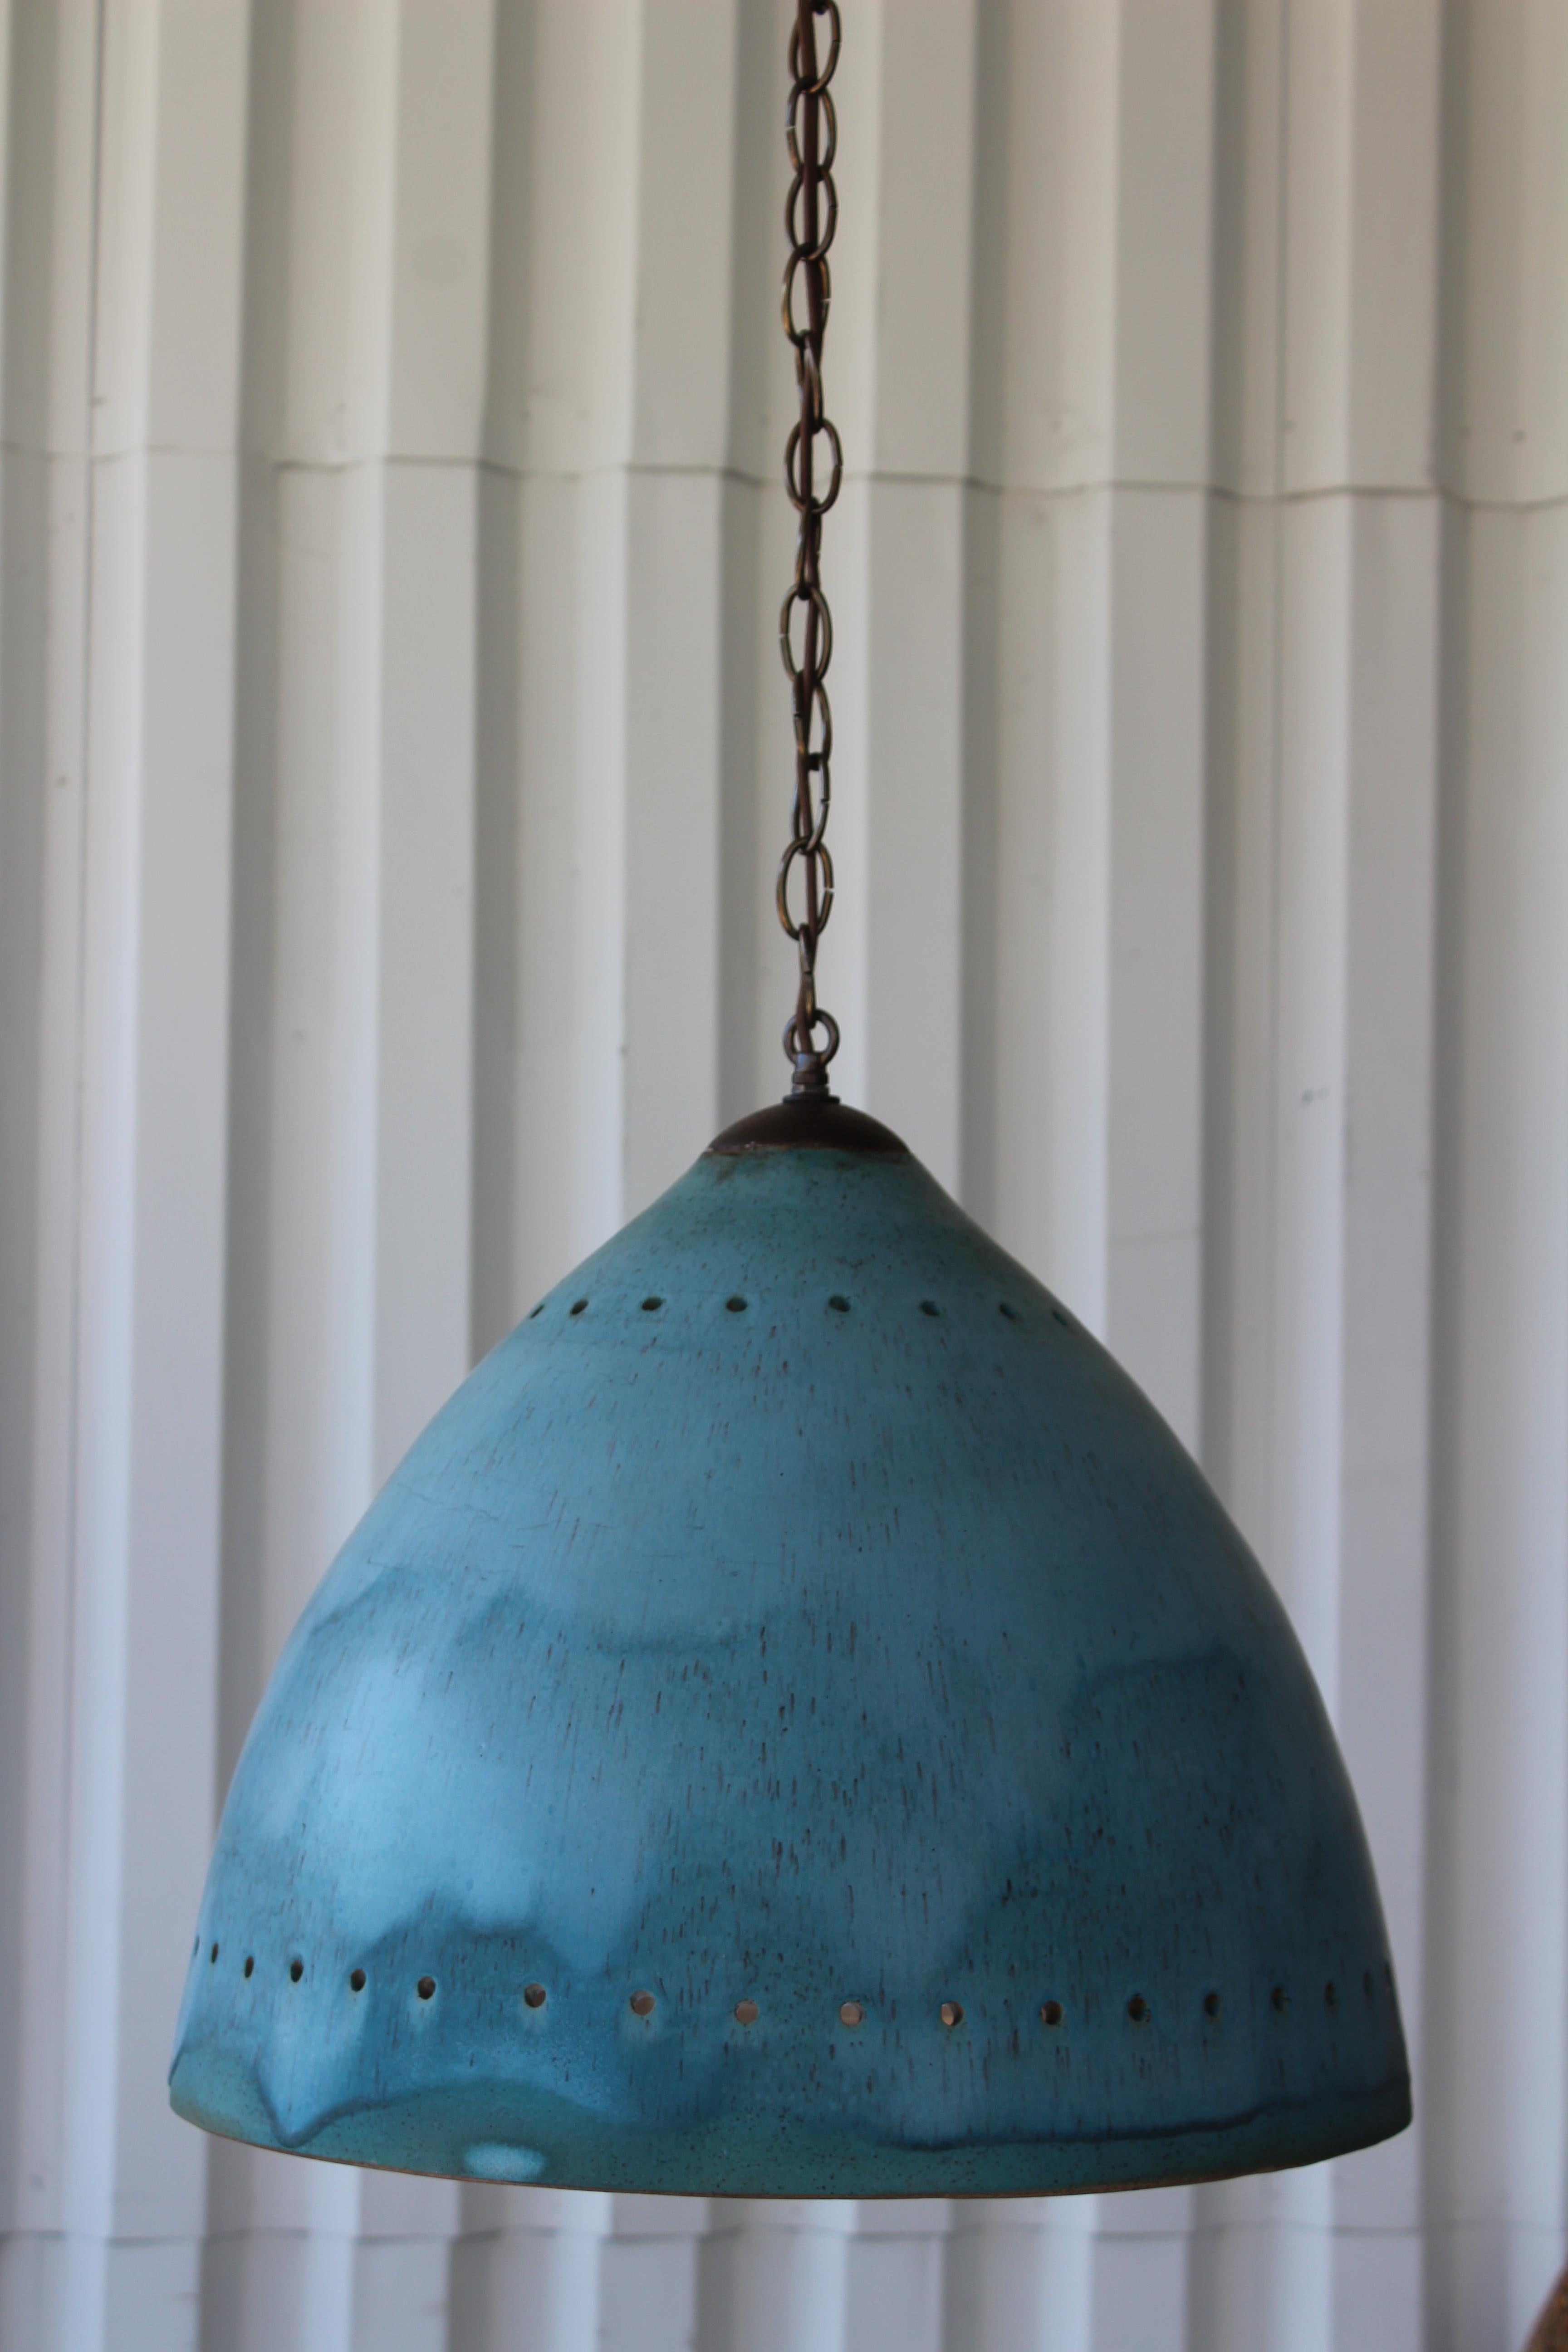 Custom made glazed ceramic pentant lights by California ceramicist Natan Moss. Newly rewired, includes 6 foot brass chain. We have 4 available, each sold individually. They are in a brilliant blue glaze and a glossy off white interior glaze. Please